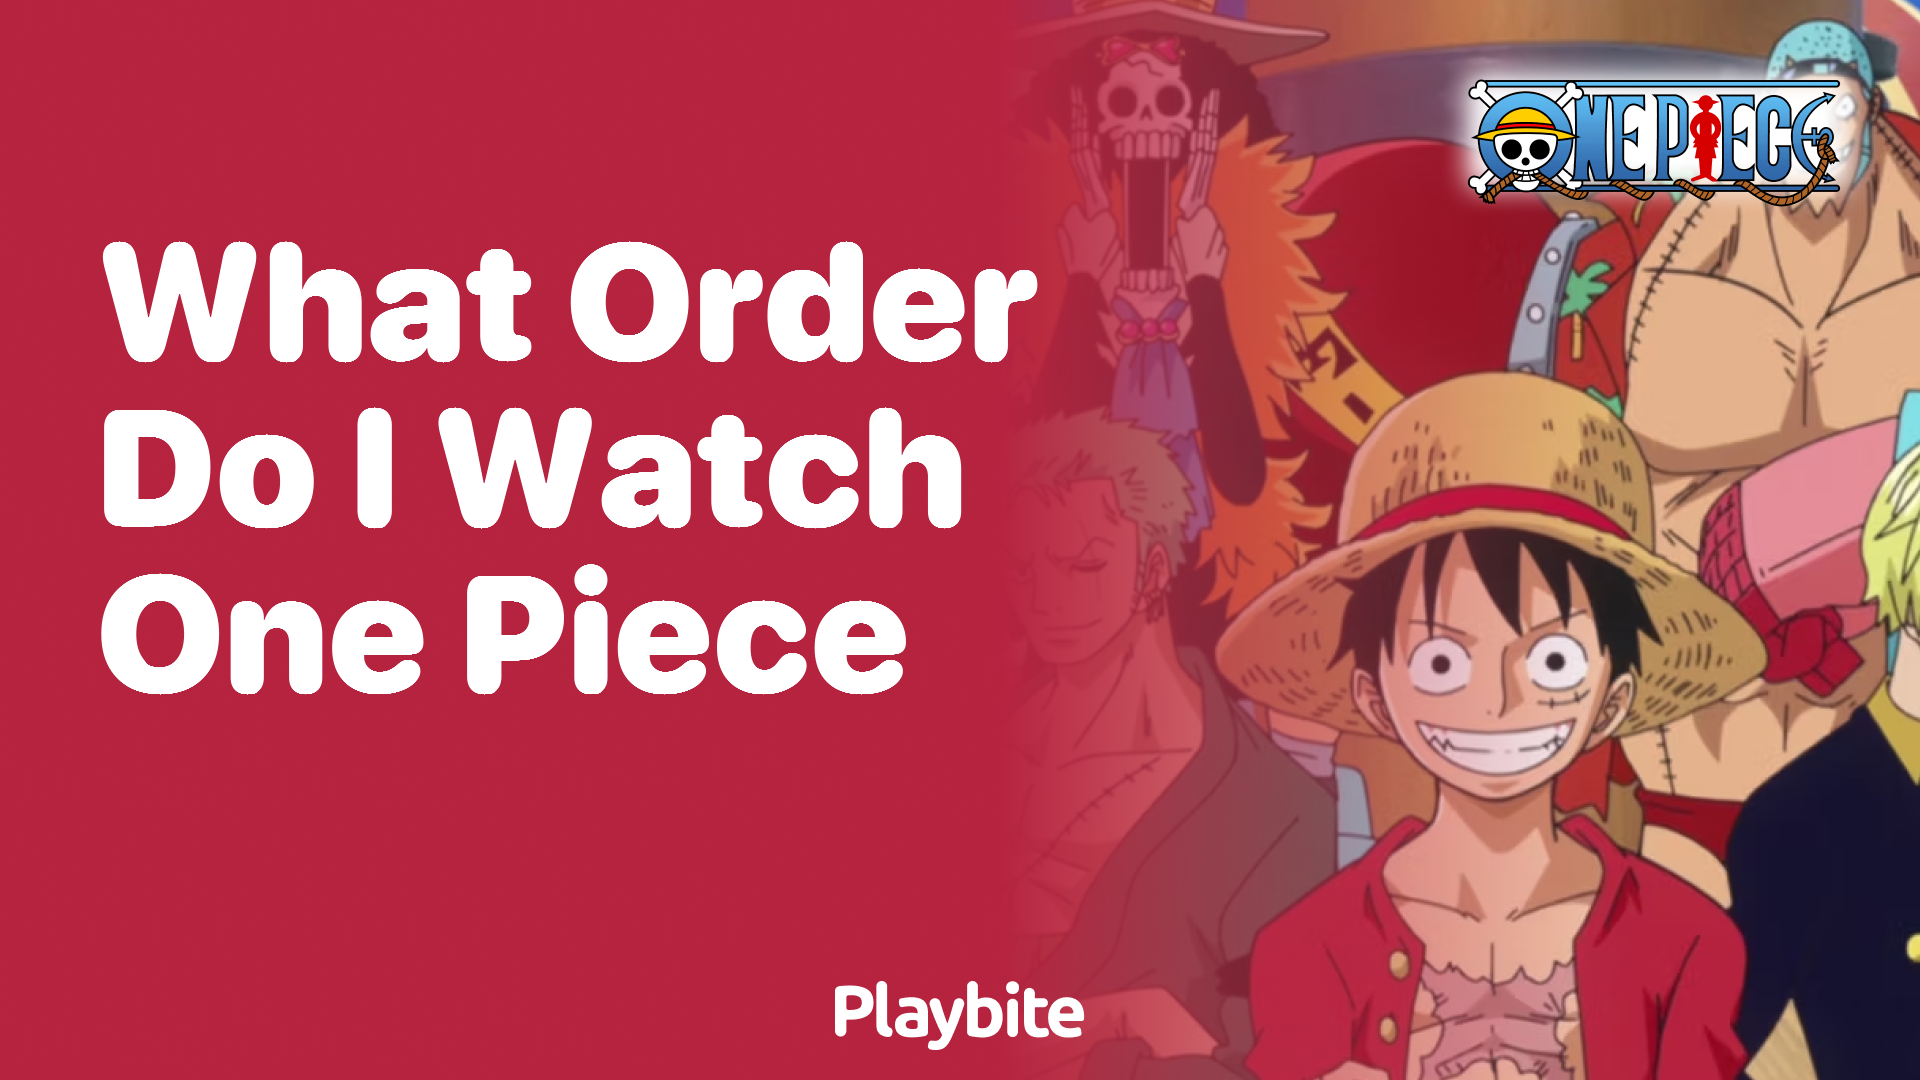 What order do I watch One Piece in?